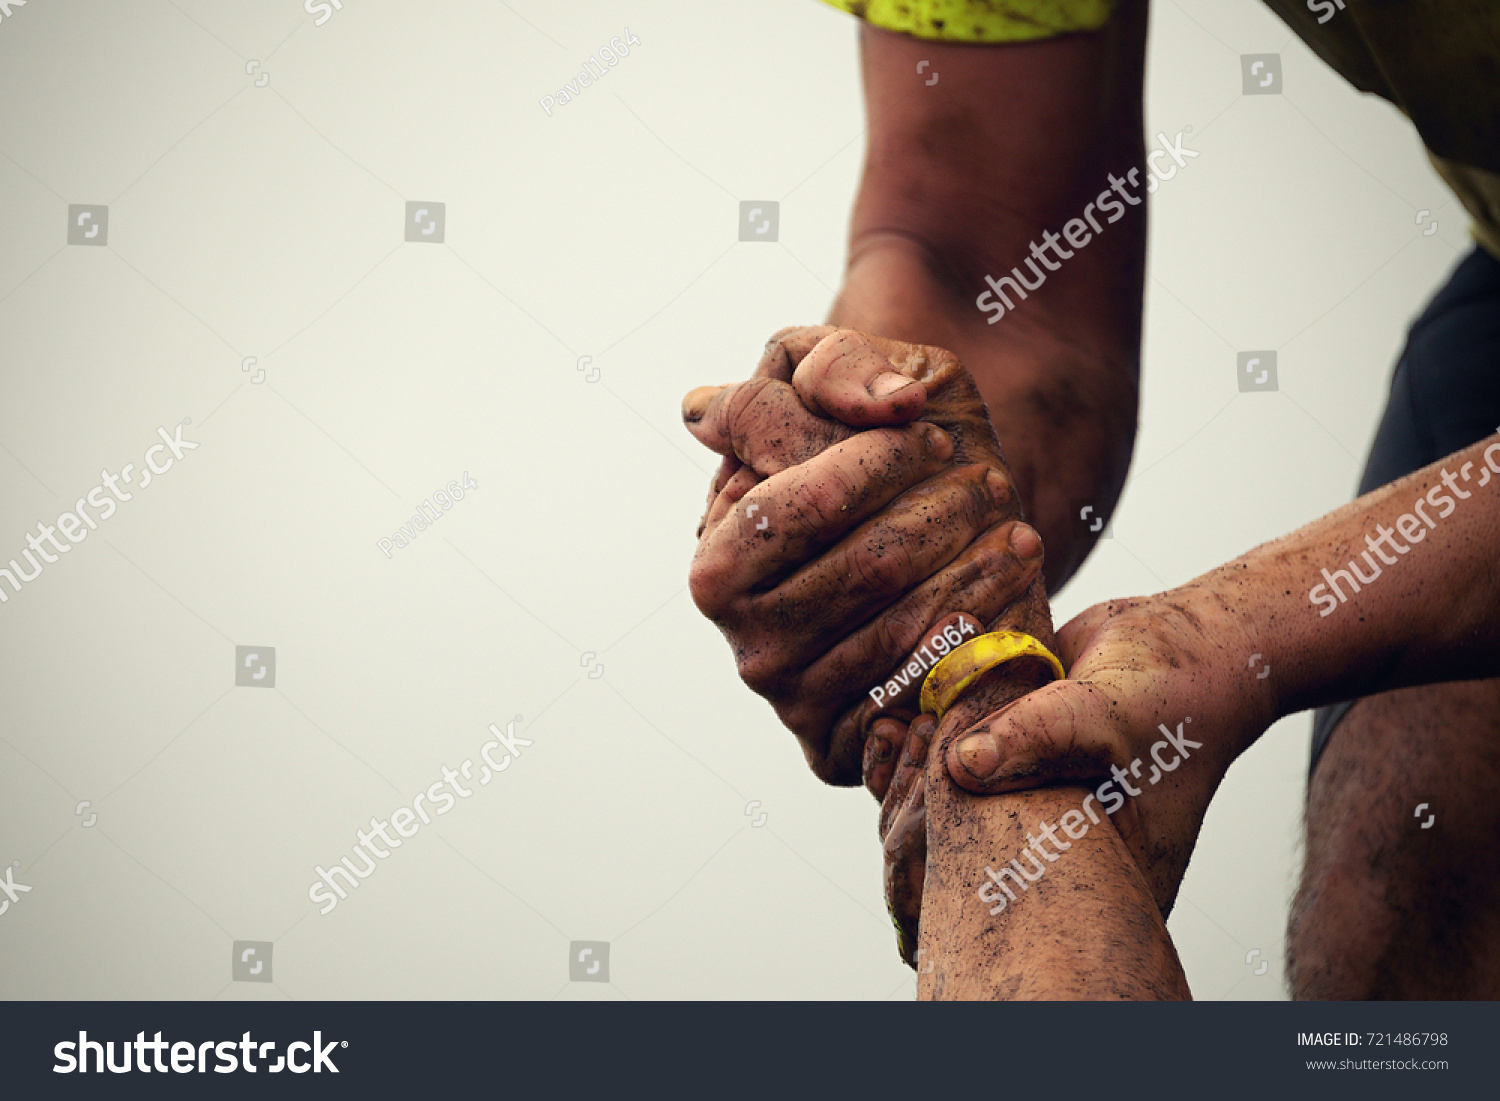 Mud race runners.Couple hold hands,help when overcoming hindrances mud #721486798